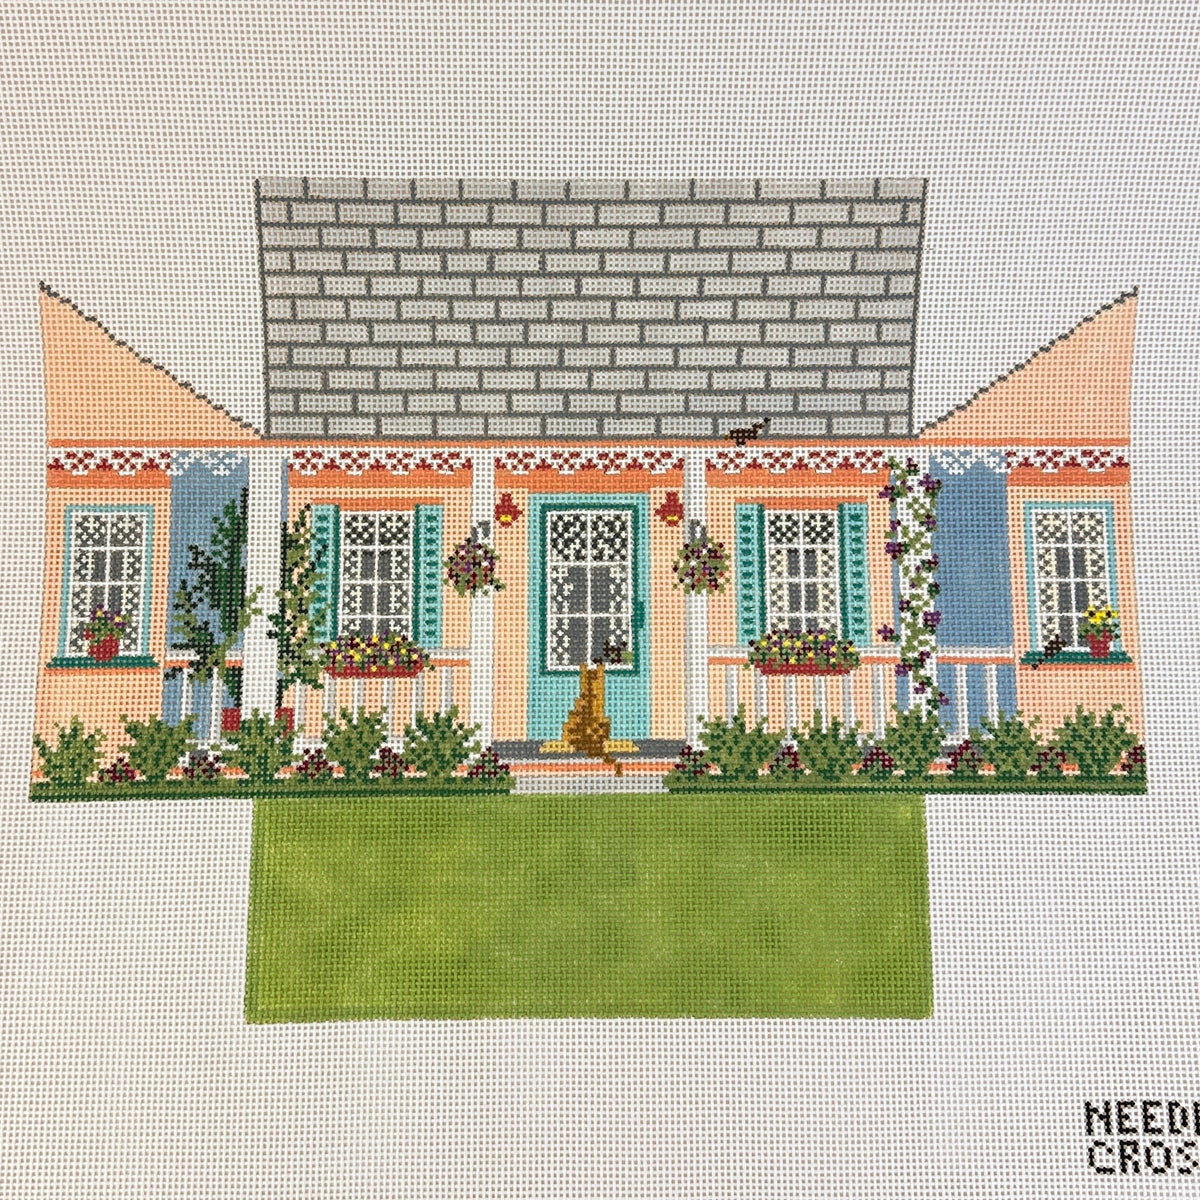 Needle Crossings Summer House Brick Cover Needlepoint Canvas